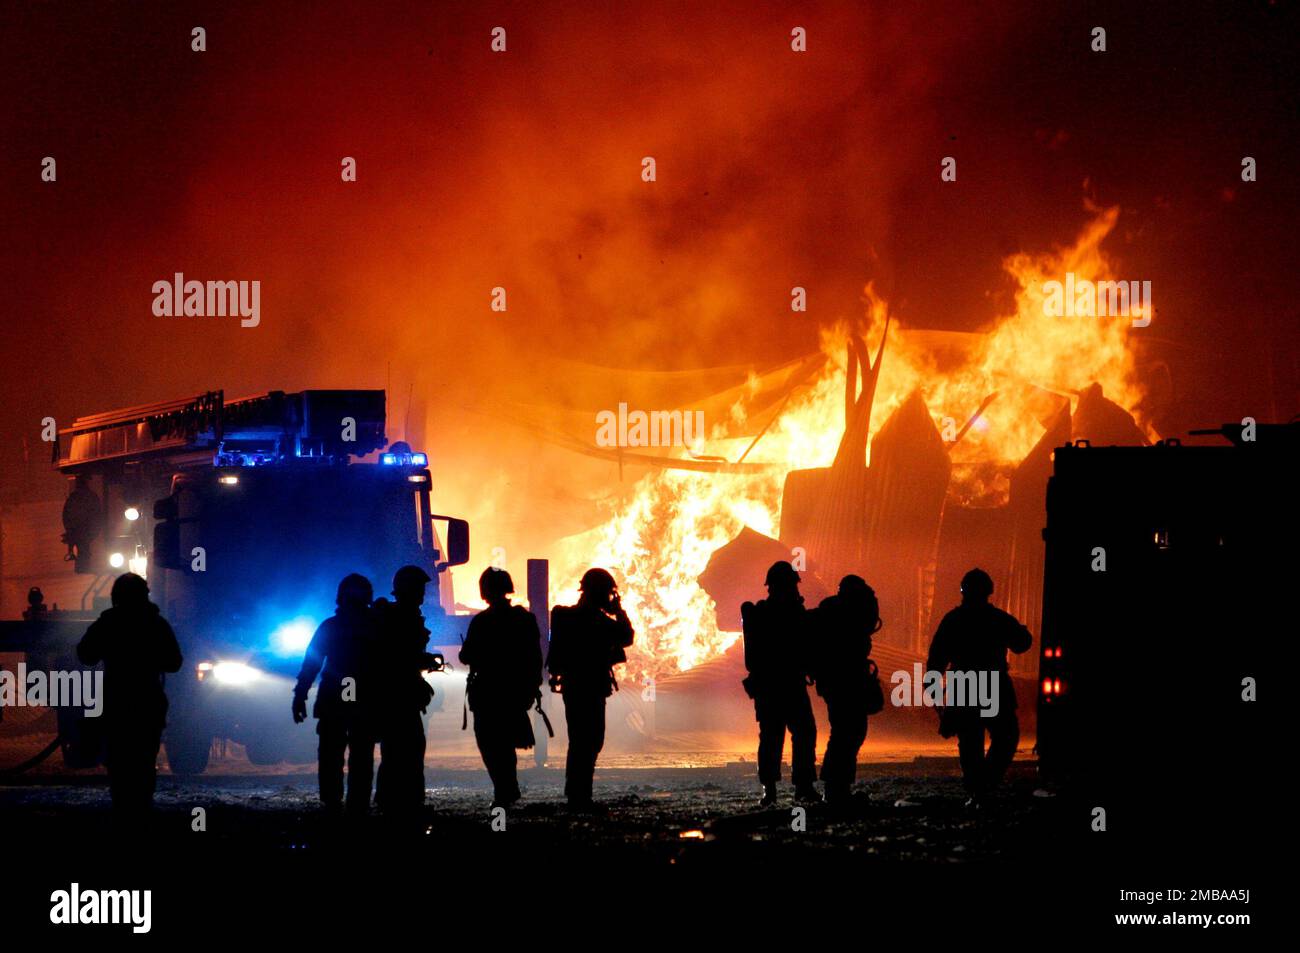 An extensive fire broke out at Runsven's warehouse in Mjölby, Sweden, this morning. Half the industrial building burned down, a total of 3,000 square meters. The warehouse held various goods such as barbecue charcoal, hair shampoo and toilet paper. Emergency services from four stations were at the scene of the fire. Stock Photo